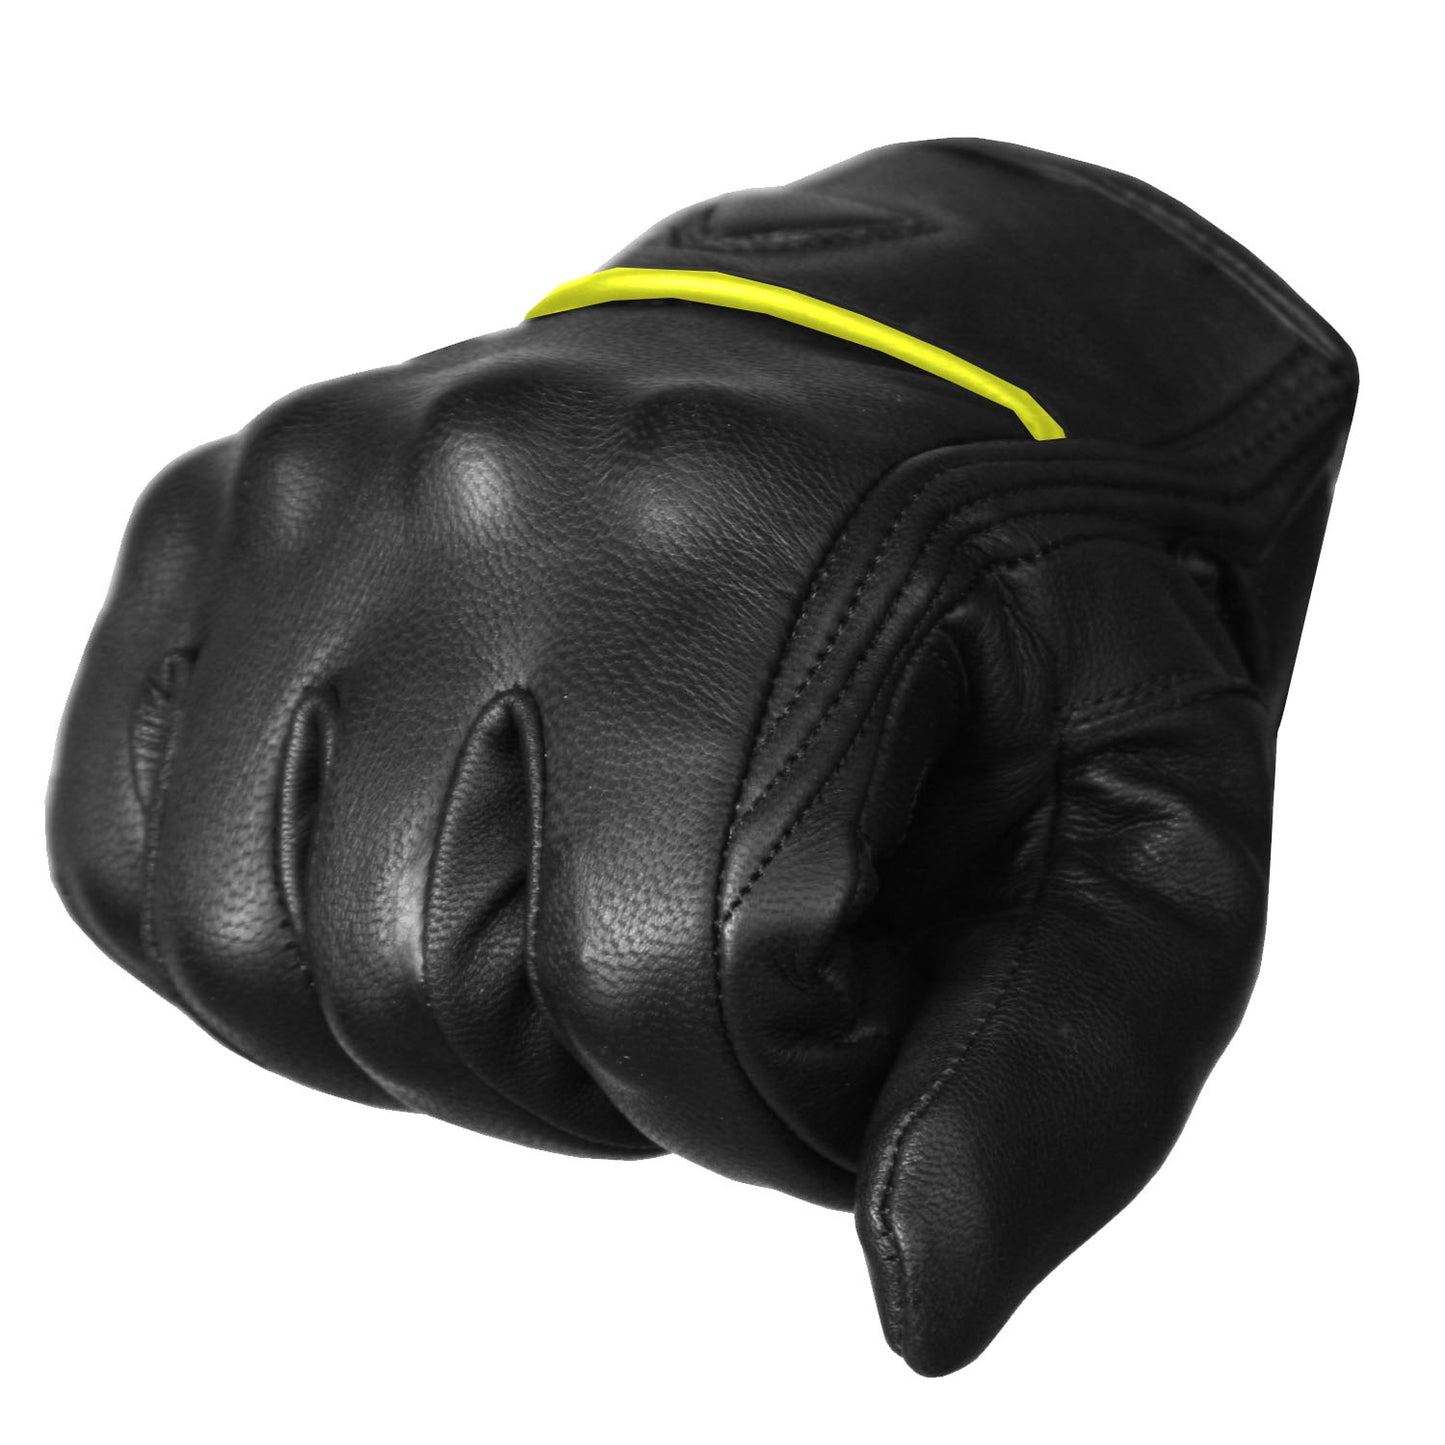 Motorcycle Bicycle Riding Racing Bike Protective Armor Gel Leather Gloves BlackGreen